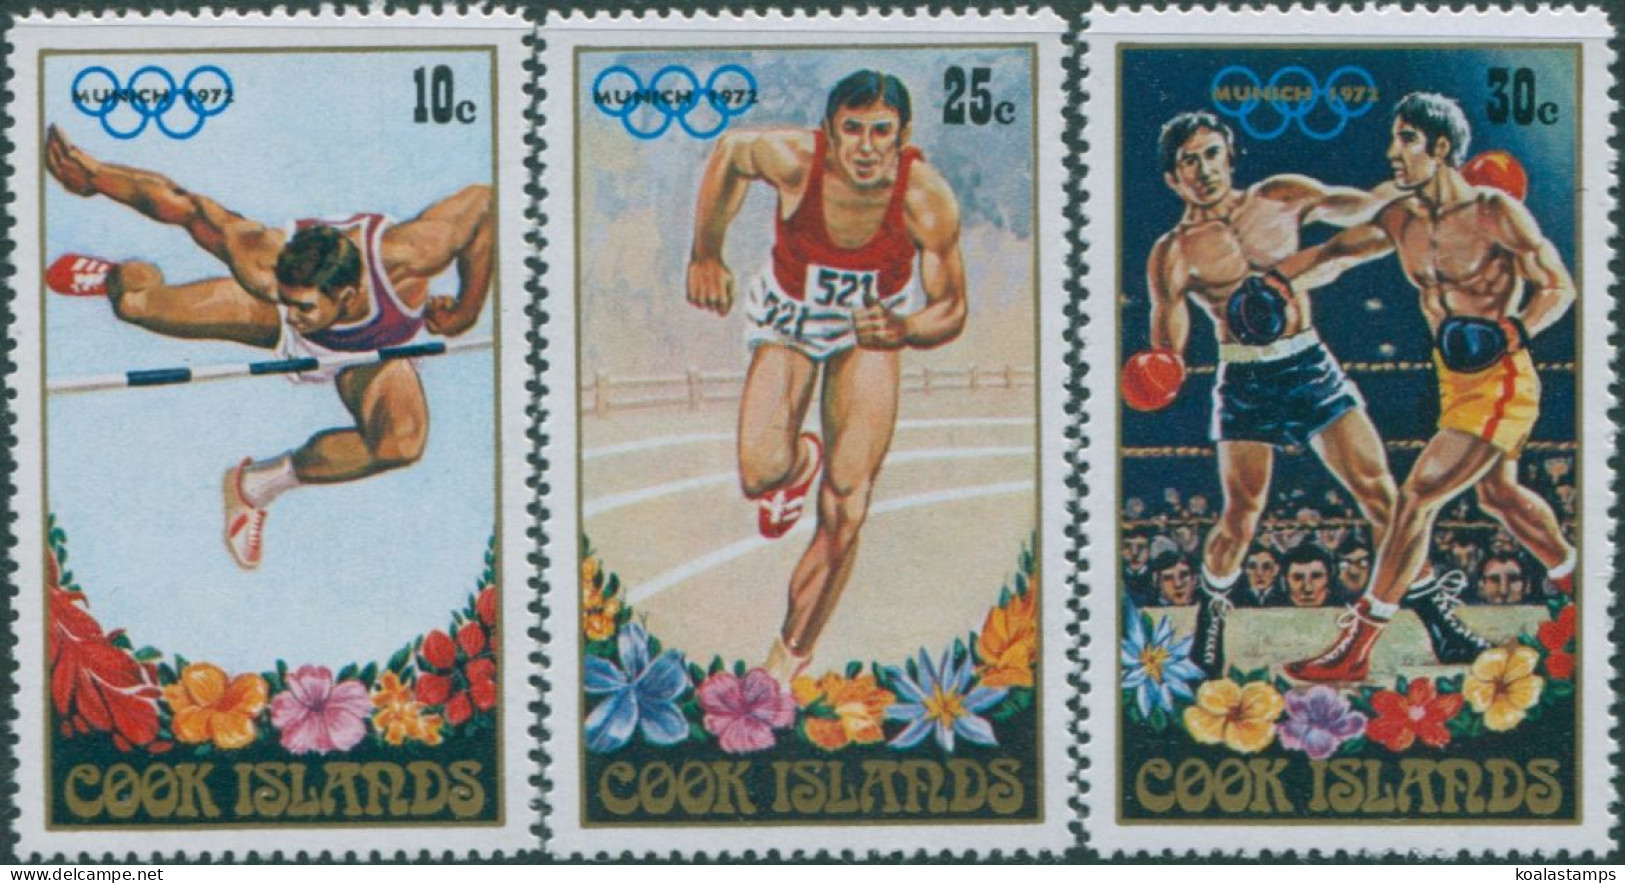 Cook Islands 1972 SG401-403 Olympic Games MNH - Cook Islands